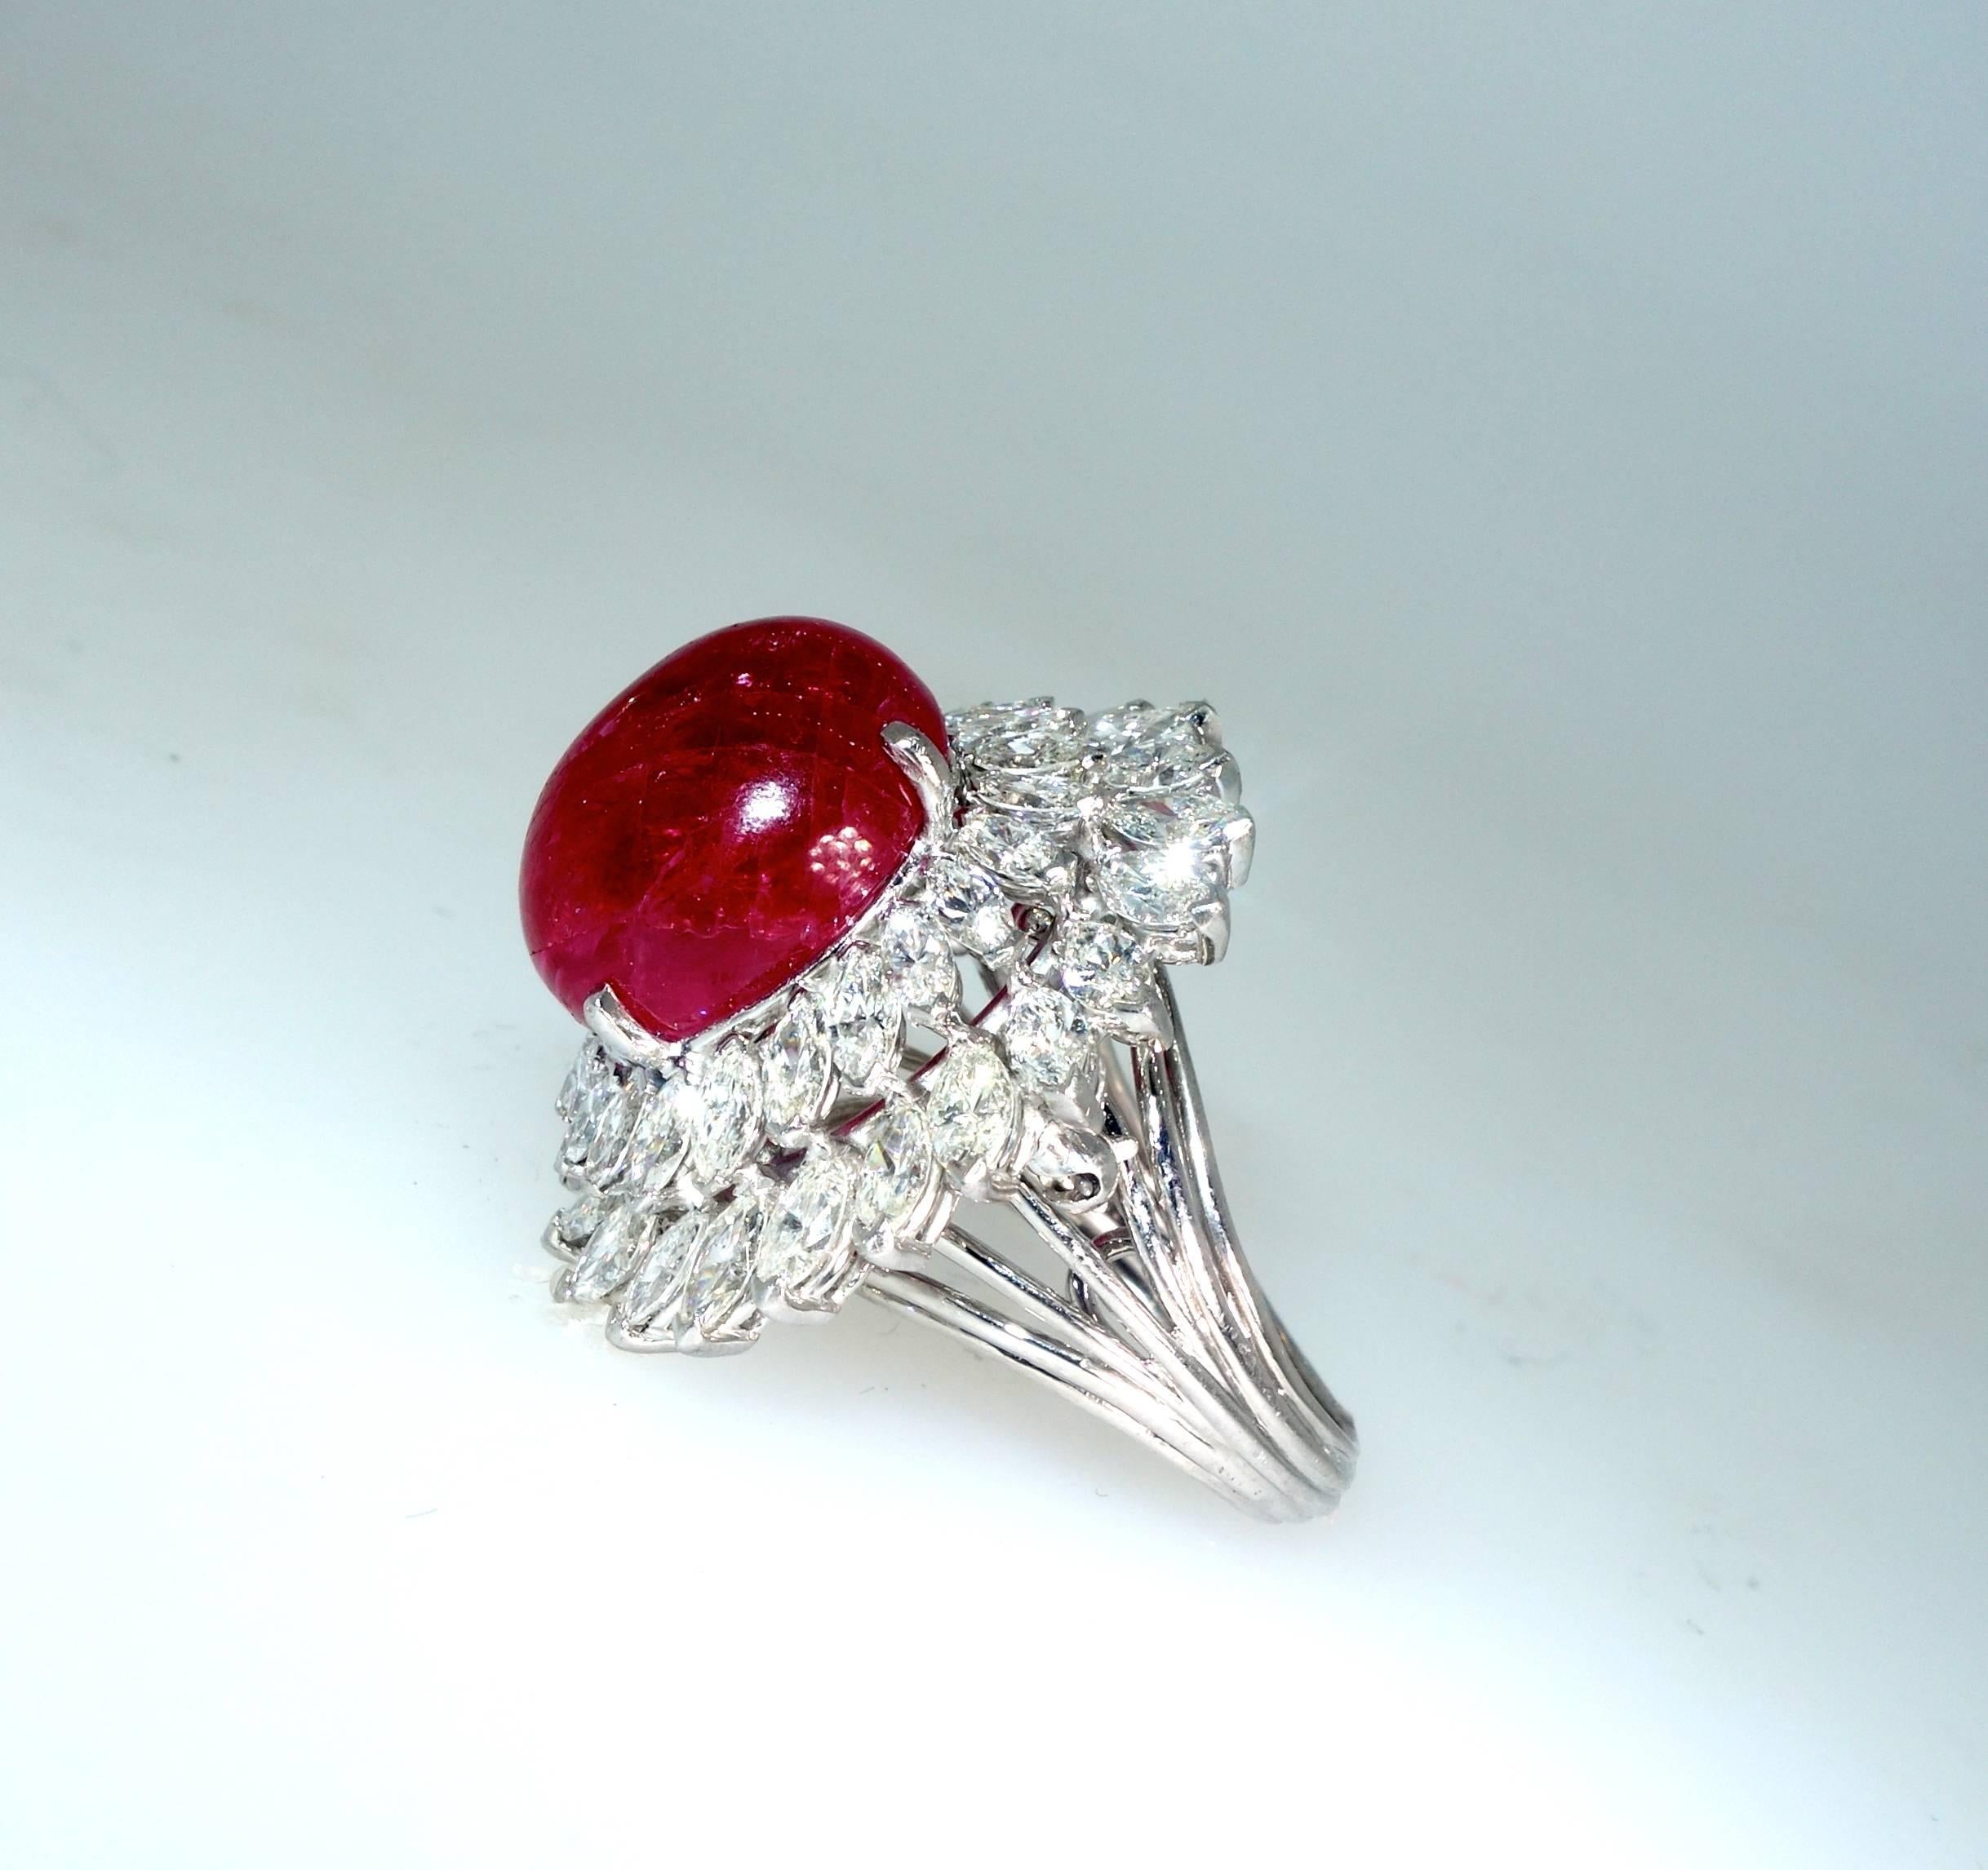 The cabochon cut center natural ruby is reminiscent of a bright red jelly bean!   The stone weighs at least 19 cts.  It is surrounded by fine white marquis cut diamonds. The  ruby has been examined by the American Gemological Laboratory and is